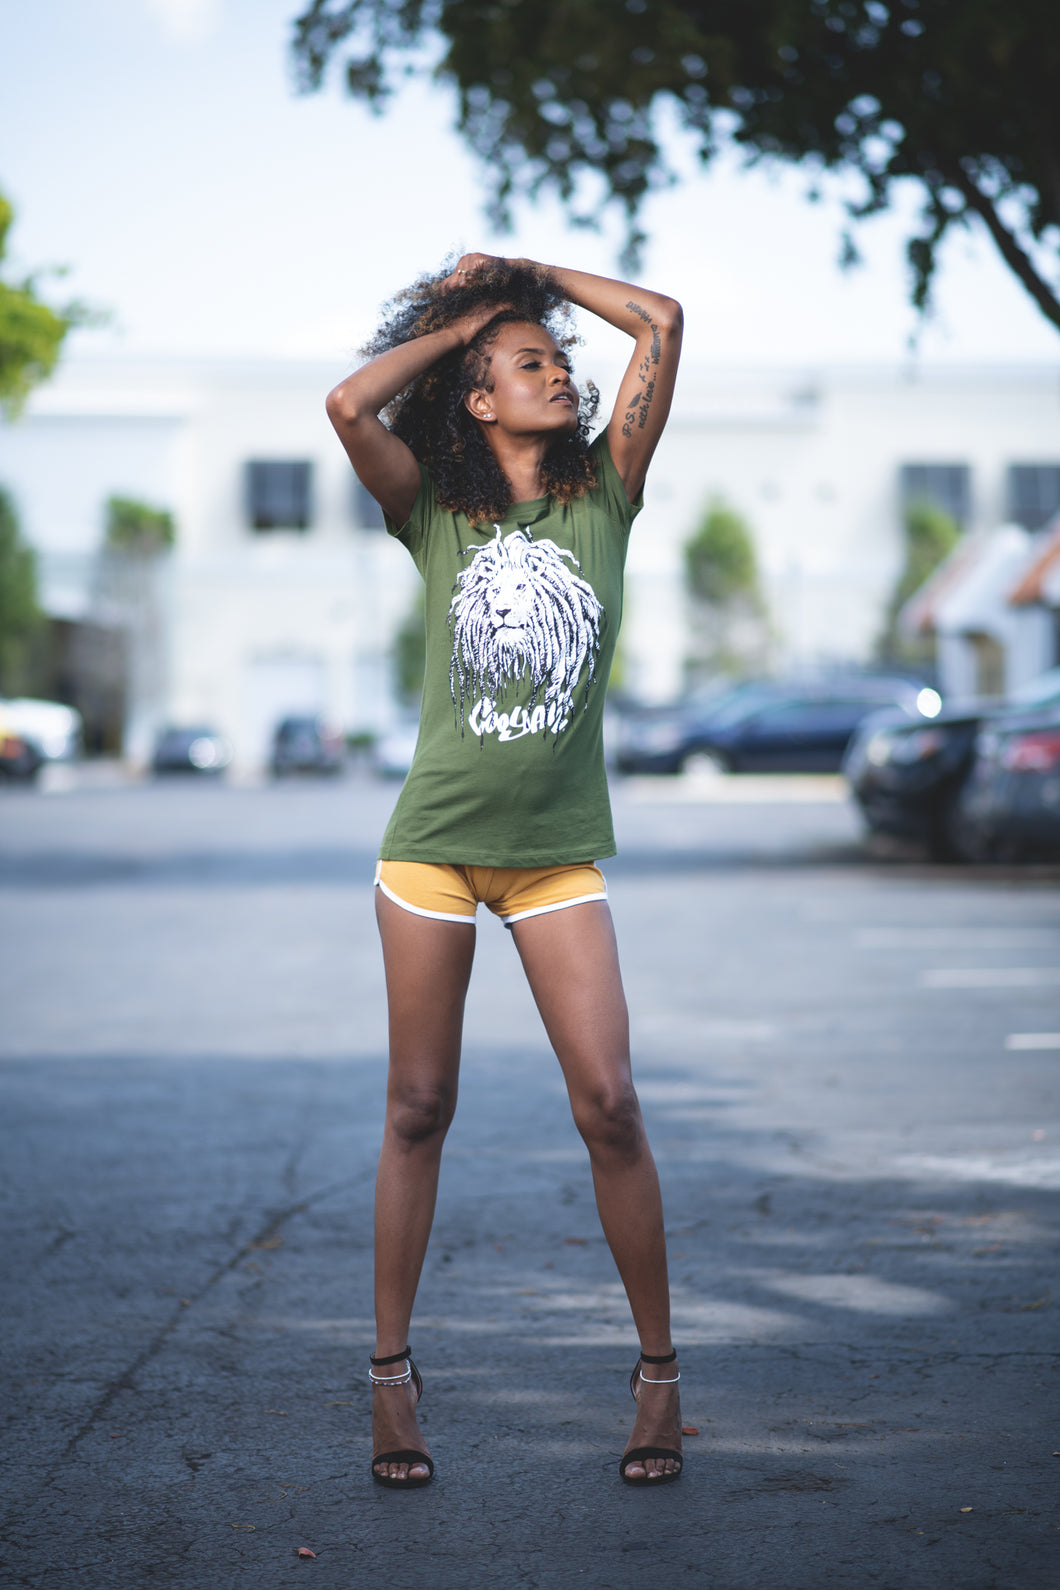 The women’s Rasta Love Lion tee is screen printed on a fitted, soft, 100% ringspun cotton shirt.  Part of our vintage collection, this artwork is created from an original hand-drawn design by Cooyah team member Tennyson Smith.  This is the new classic Cooyah to add to your closet today, designed with a premium print and our signature logo on the back.